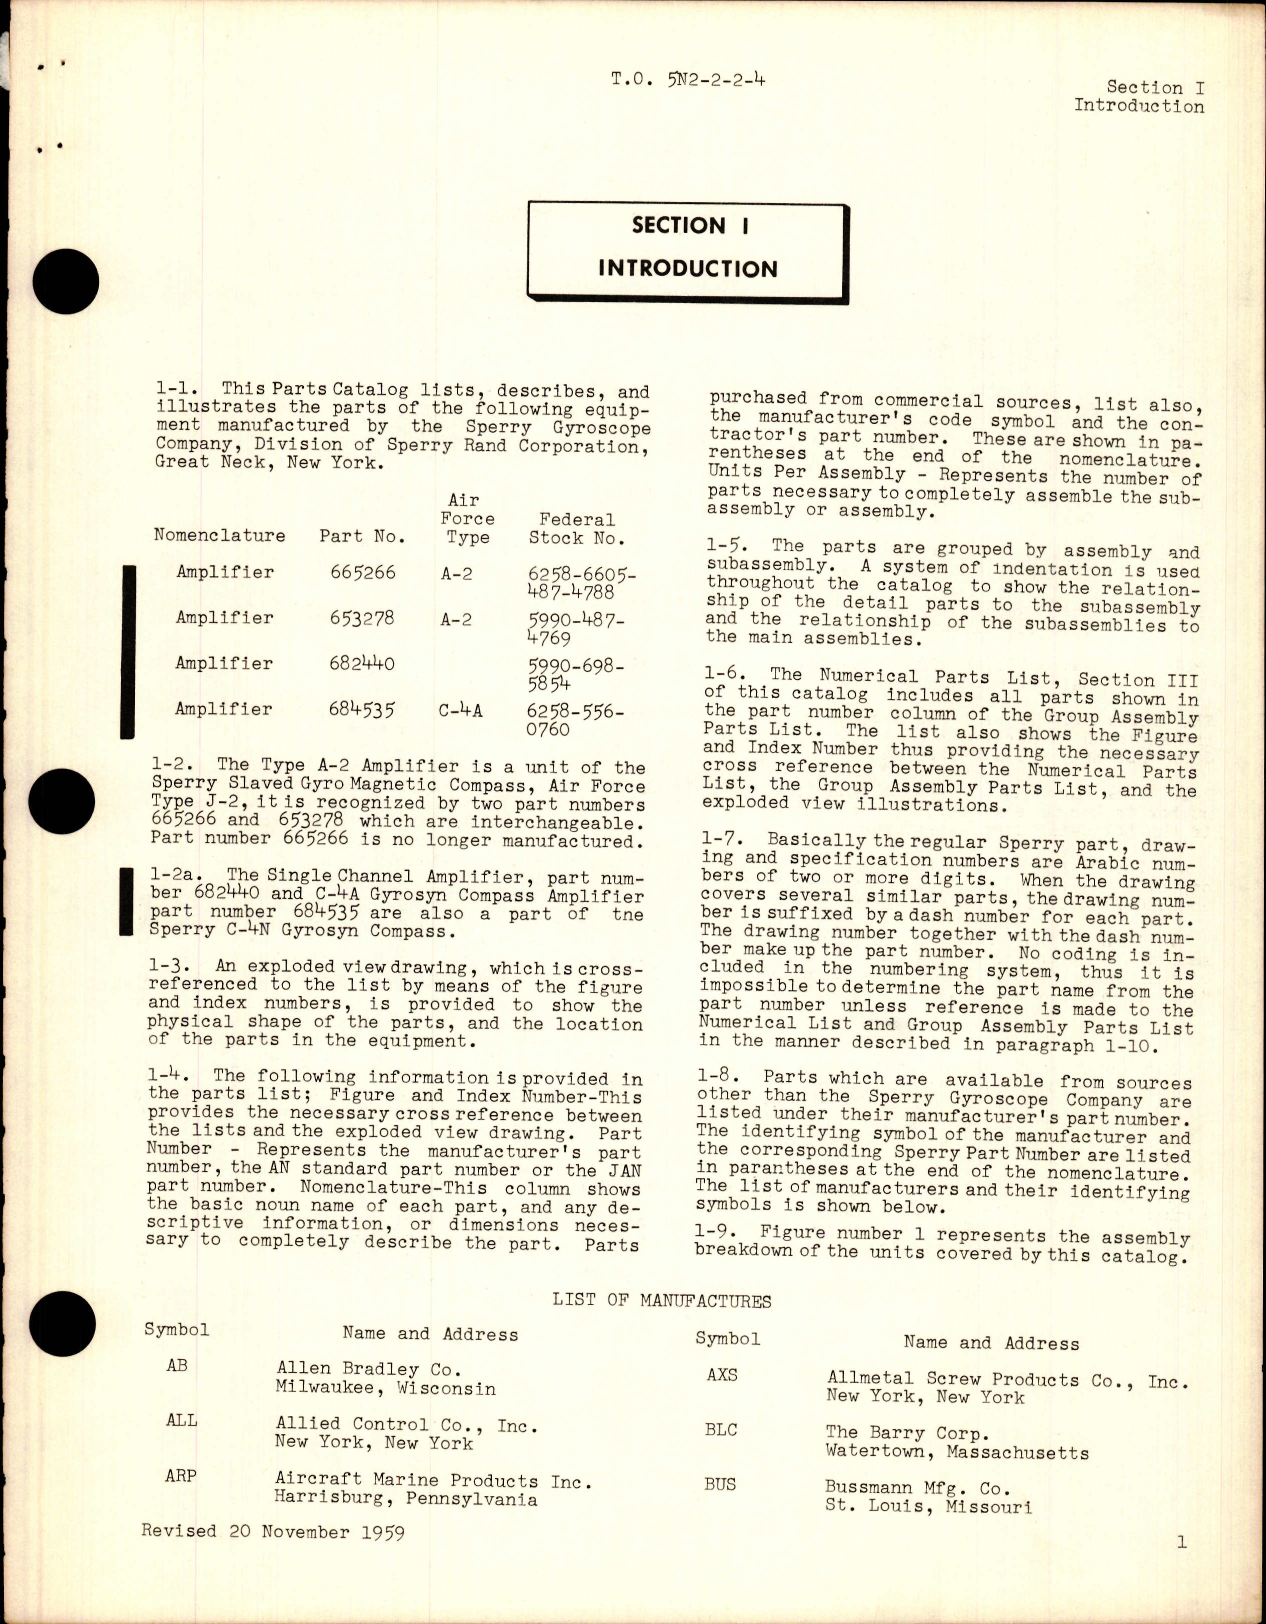 Sample page 5 from AirCorps Library document: Parts Catalog for Type A-2 Compass Amplifier, Single Channel Amplifier, and C-4A Gyrosyn Compass Amplifier